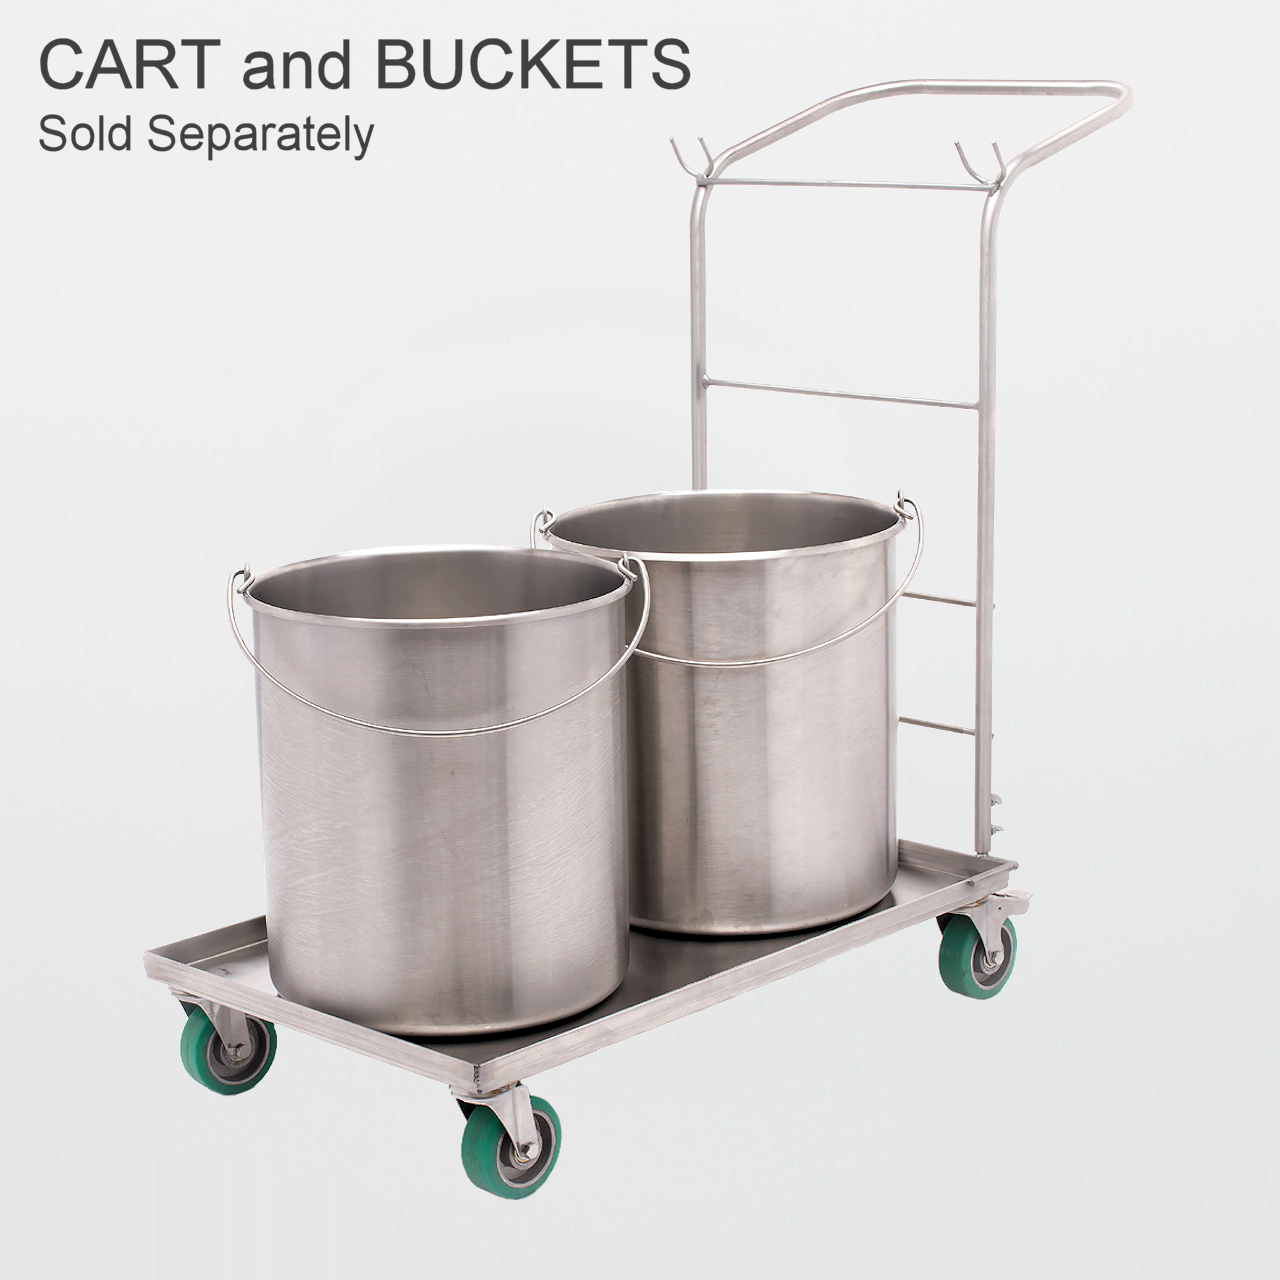 Texwipe TX7066 BetaMop Stainless Steel 10 gallon Bucket with Casters  (BUCKET ONLY)